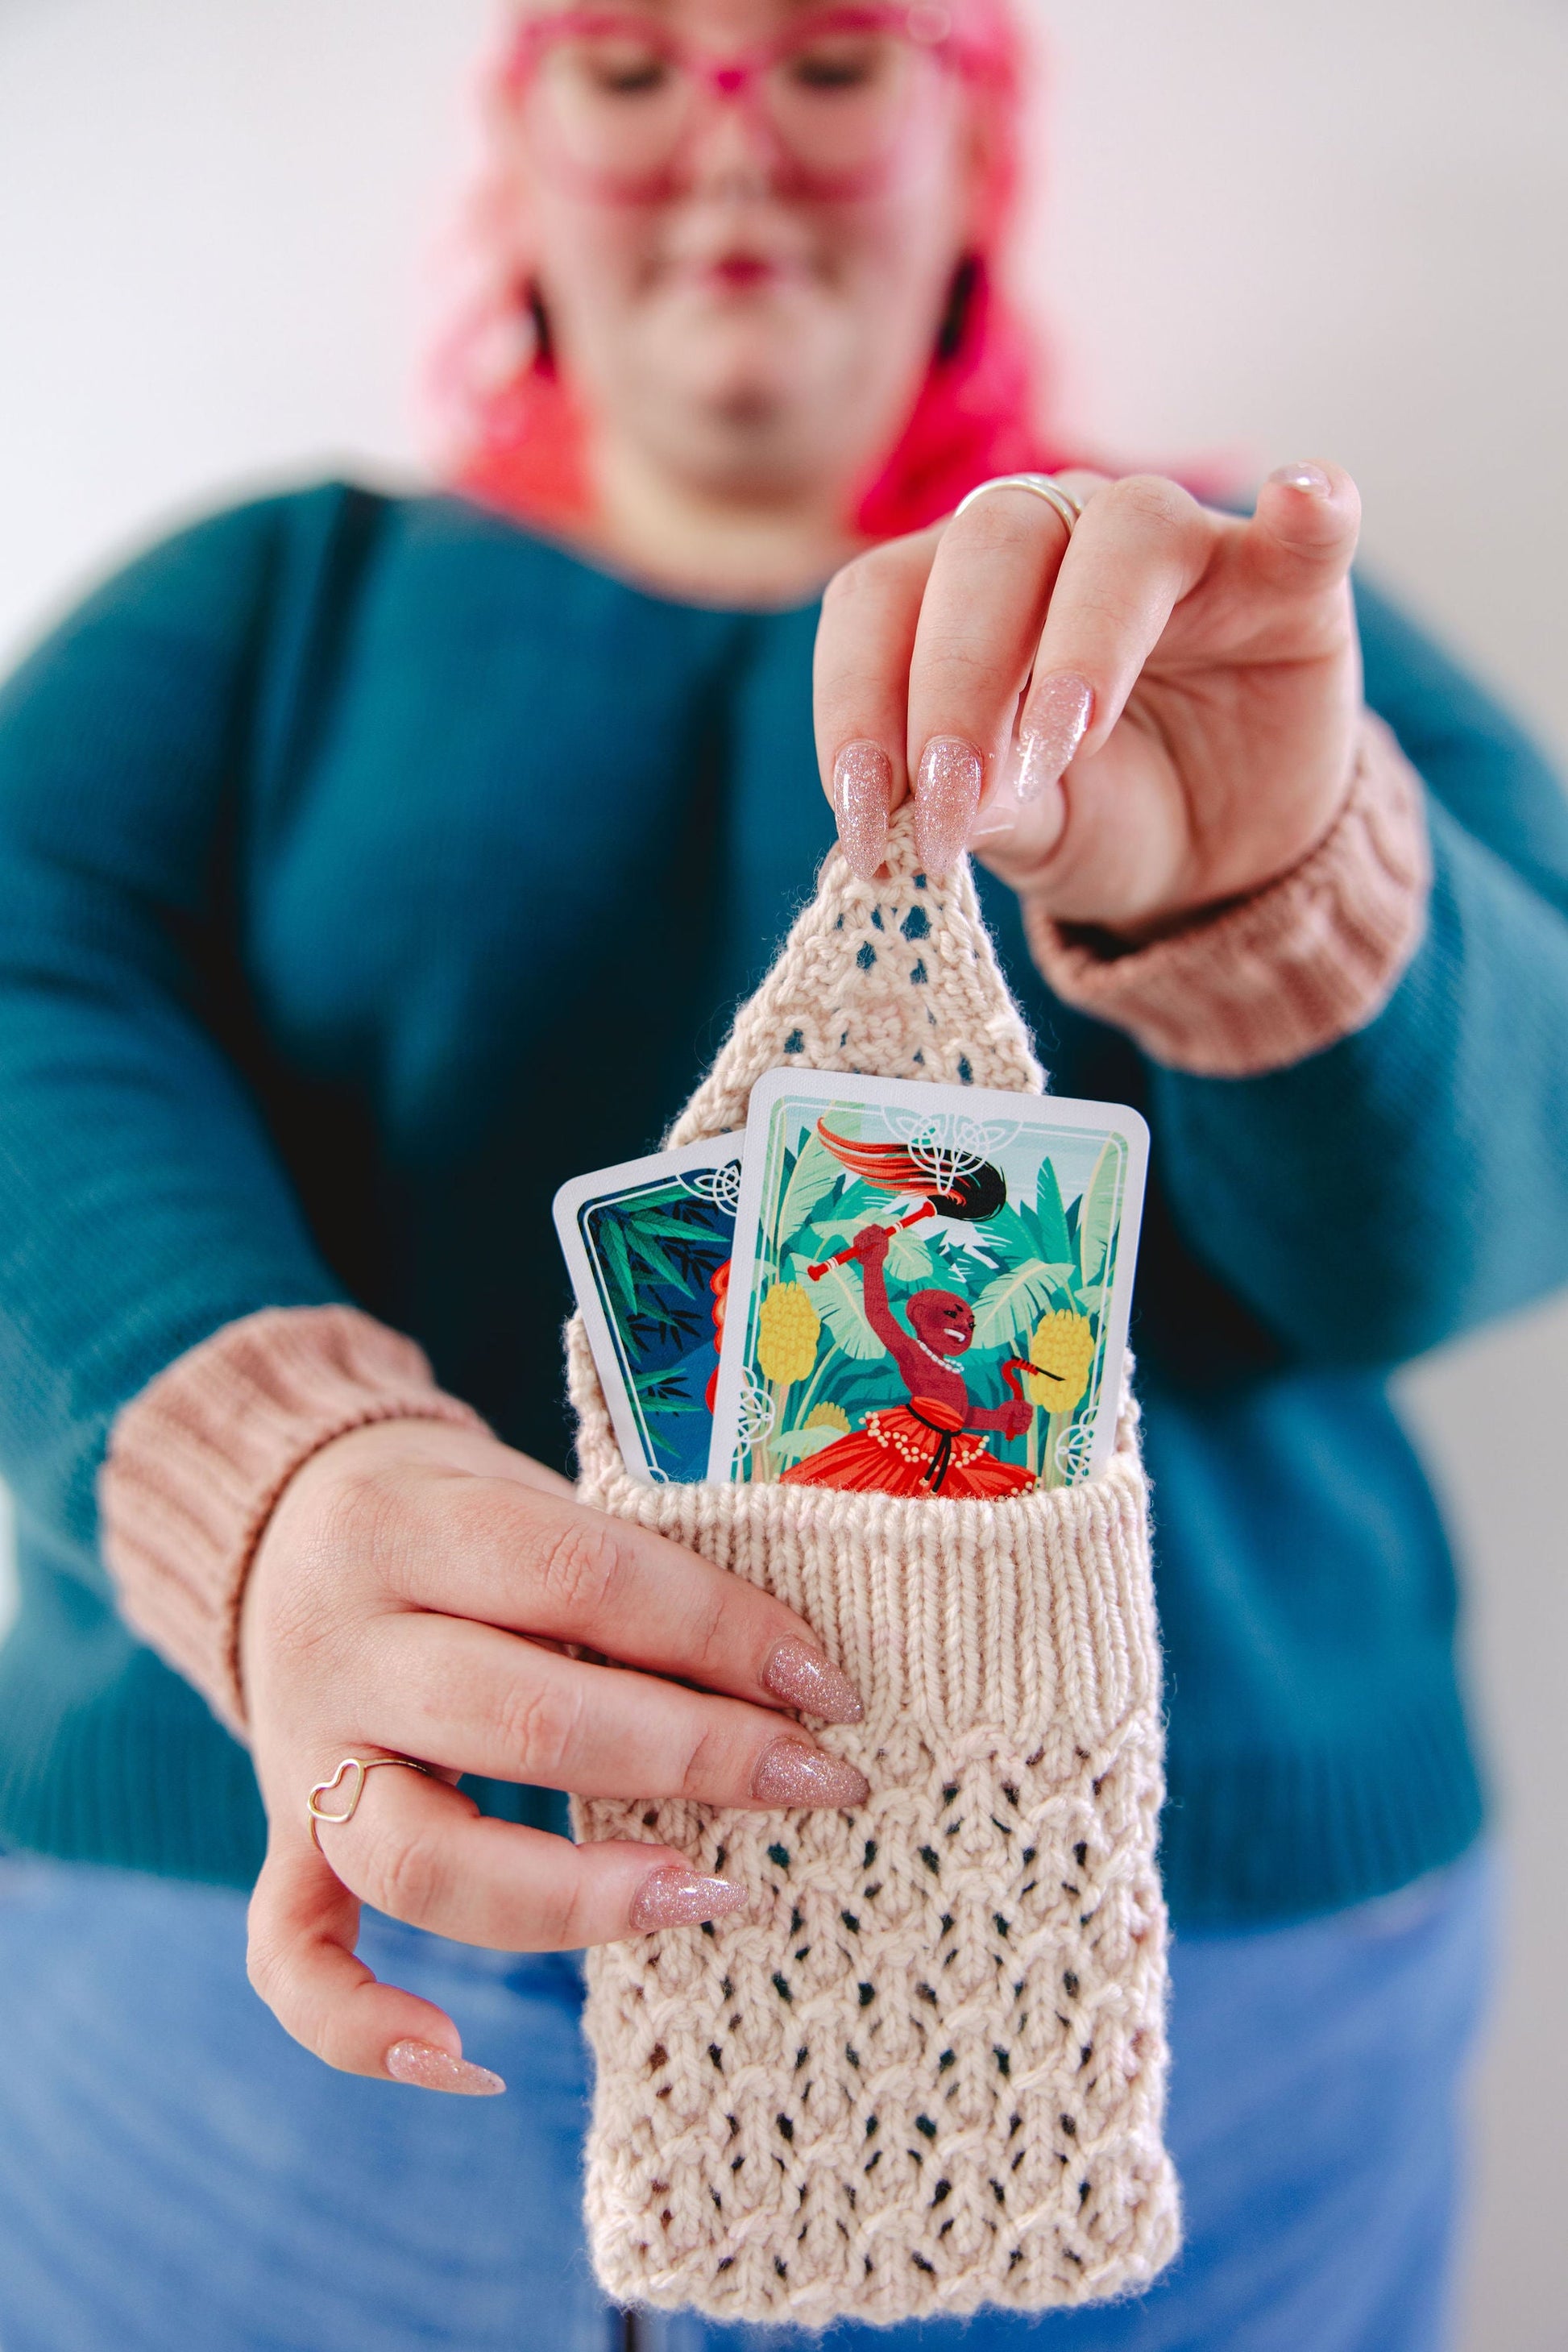 Courtney, who has pink hair and matching pink glasses, holds a lace knit pouch open. Inside the pouch are two brightly coloured tarot cards.